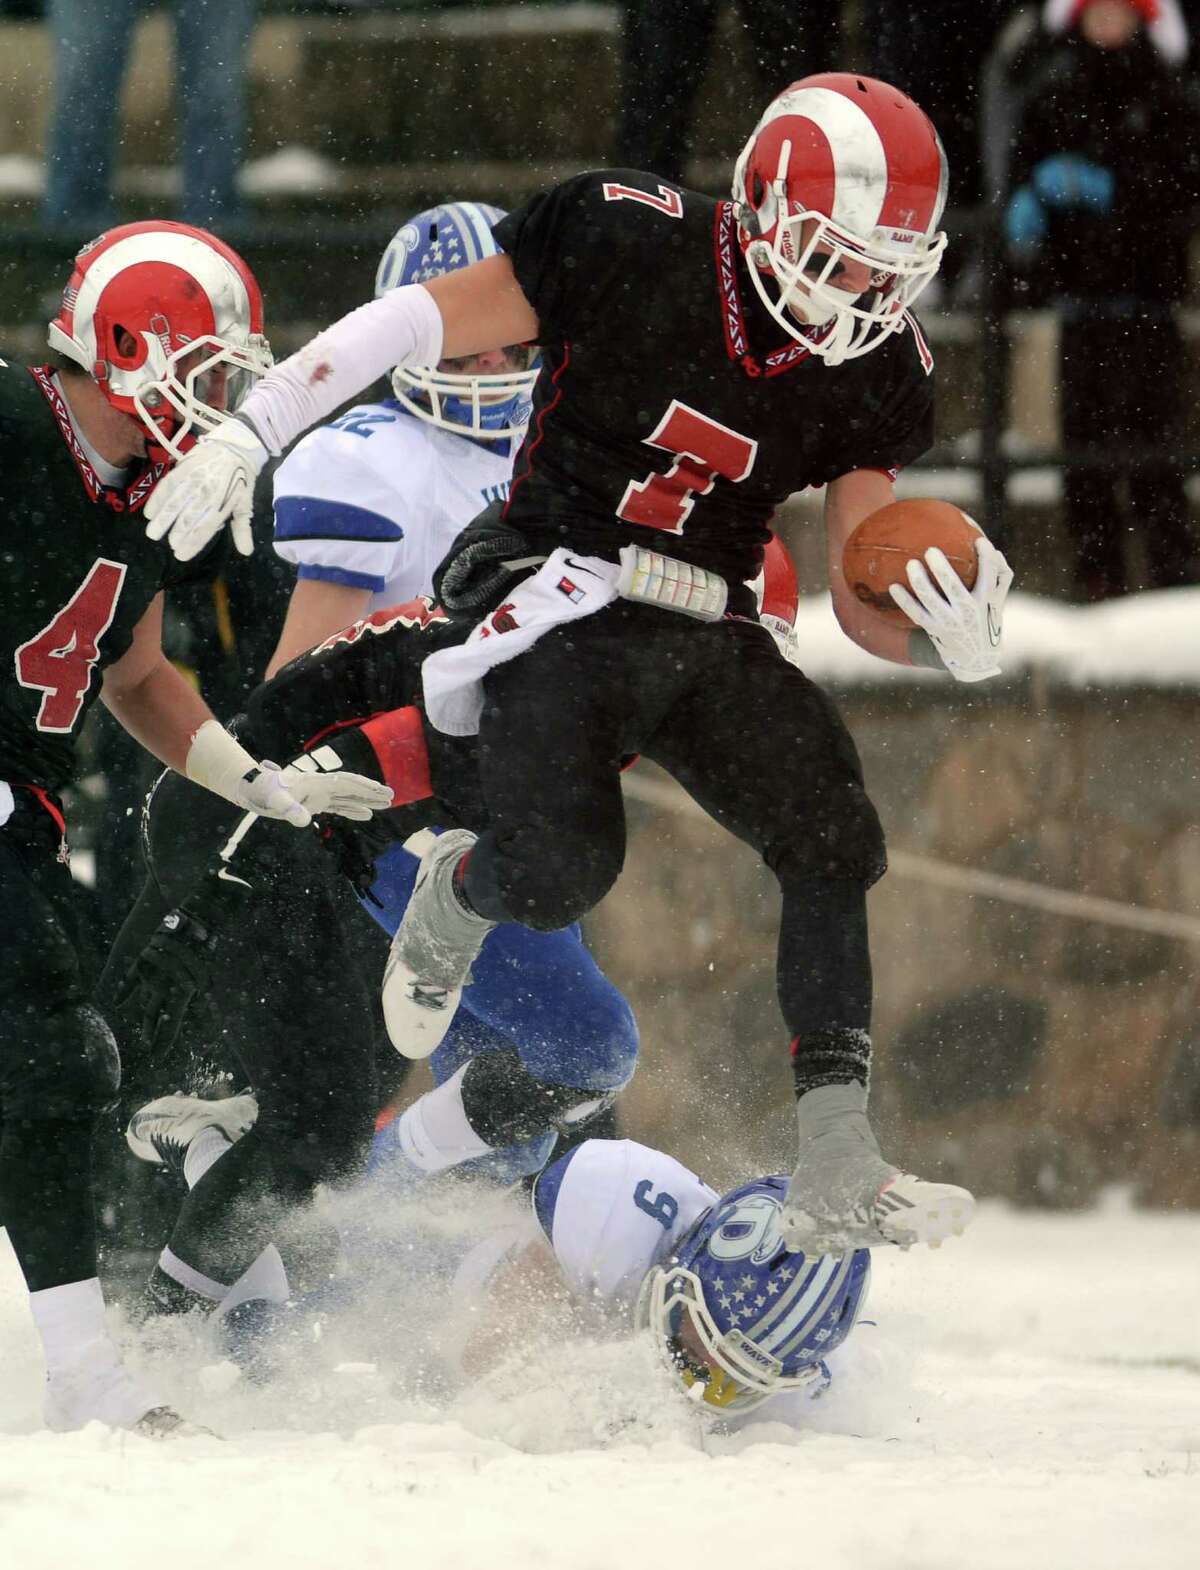 New Canaan's Alexander LaPolice escapes a tackle on his way to a touchdown during the Class L state championship game against Darien on Saturday, Dec. 14, 2013 at Boyle Stadium in Stamford, Conn.